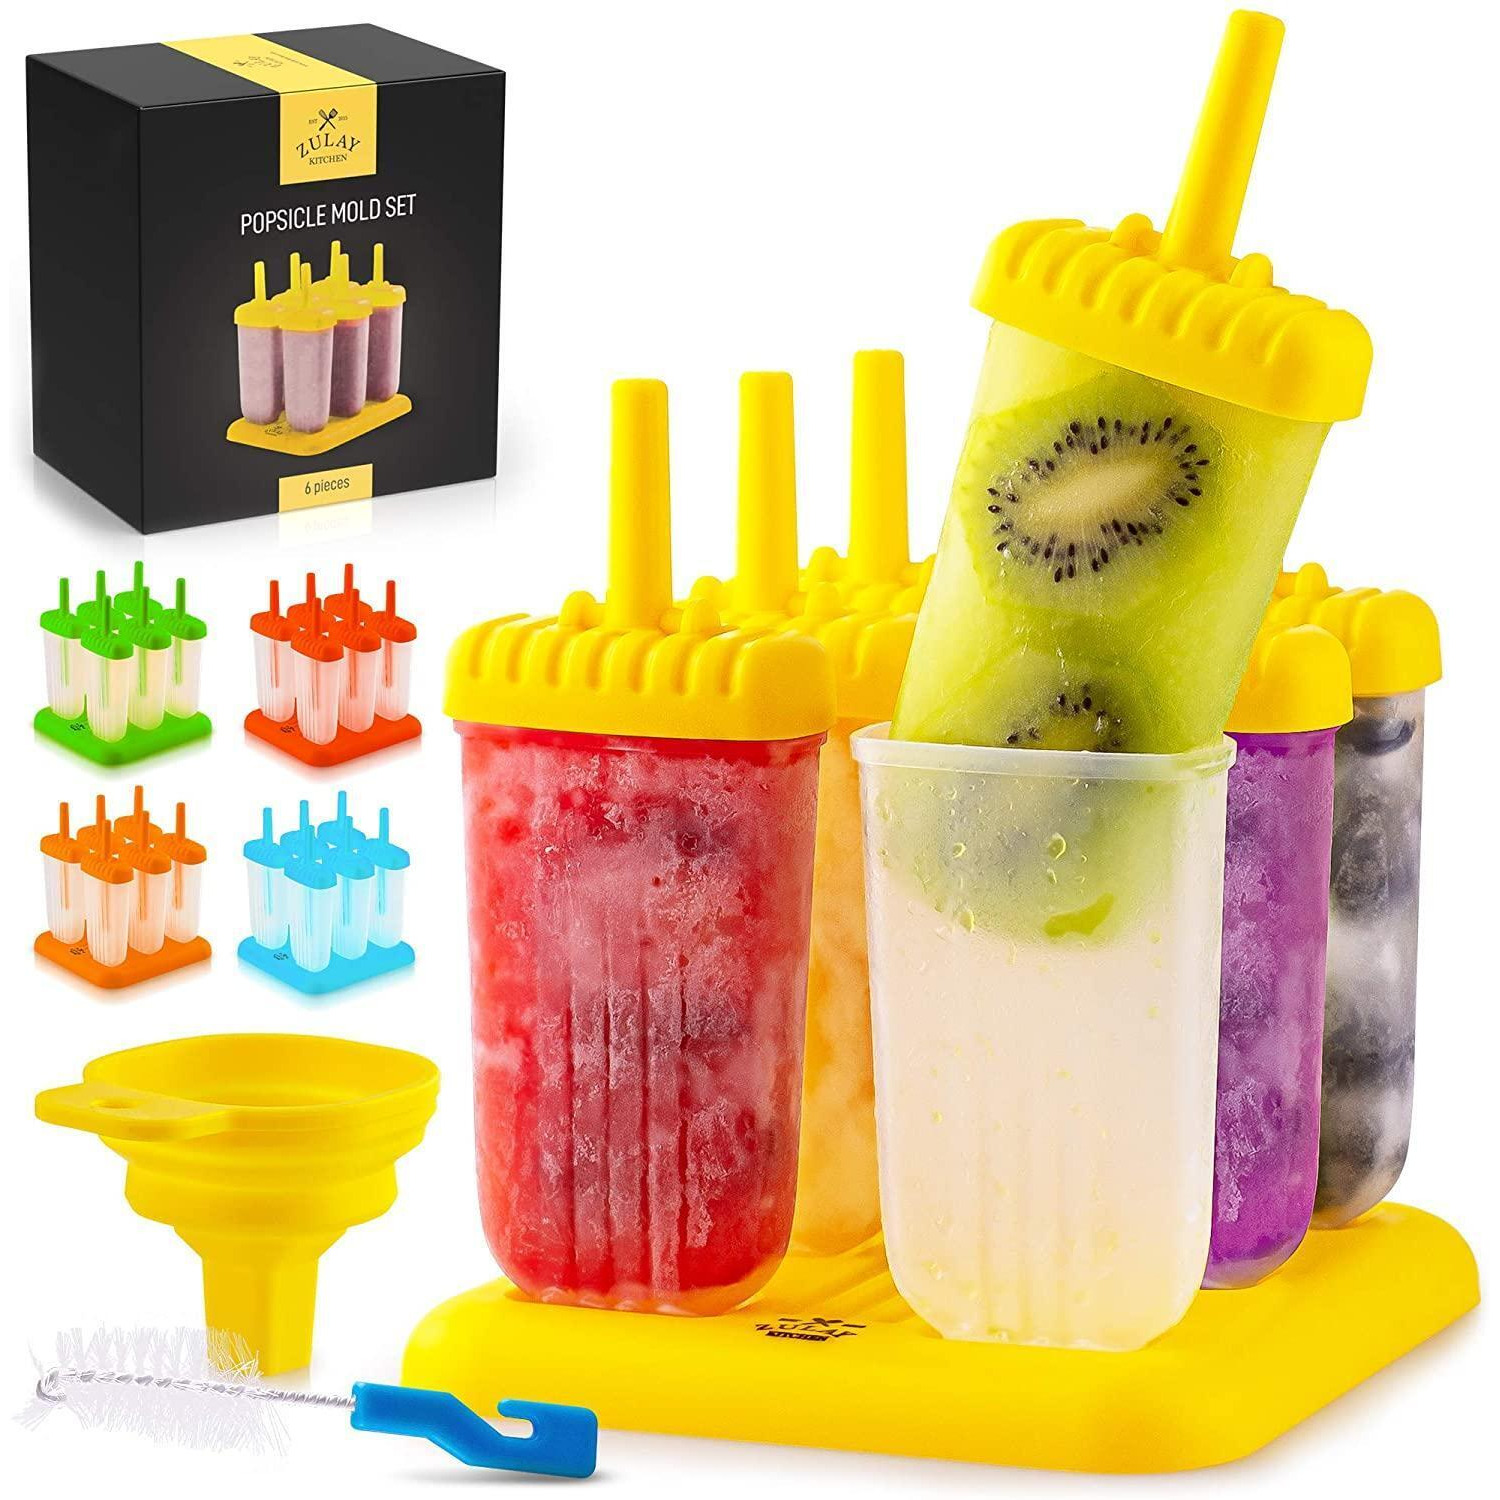 Zulay Kitchen Popsicle Molds Set of 6 - BPA Free Reusable Molds With Drip Guard, Tray, Silicone Funnel & Cleaning Brush alternate image